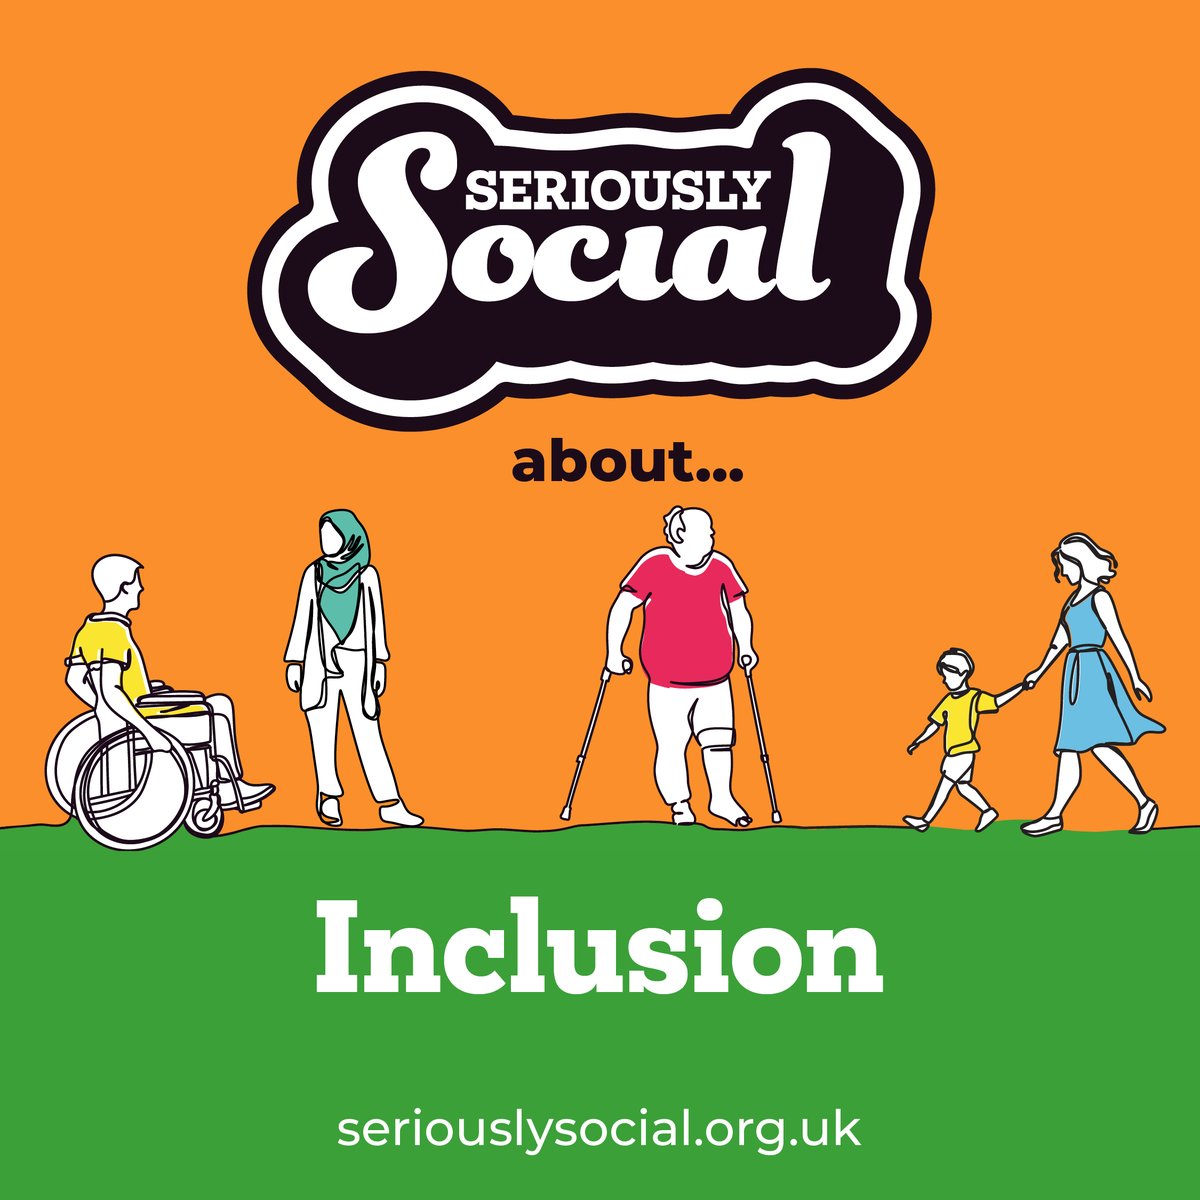 People who are socially excluded or face barriers to participation - including poverty, disability or geography - often have poorer health outcomes. Our members' doors are open to everyone #SeriouslySocial #Inclusion>> seriouslysocial.org.uk